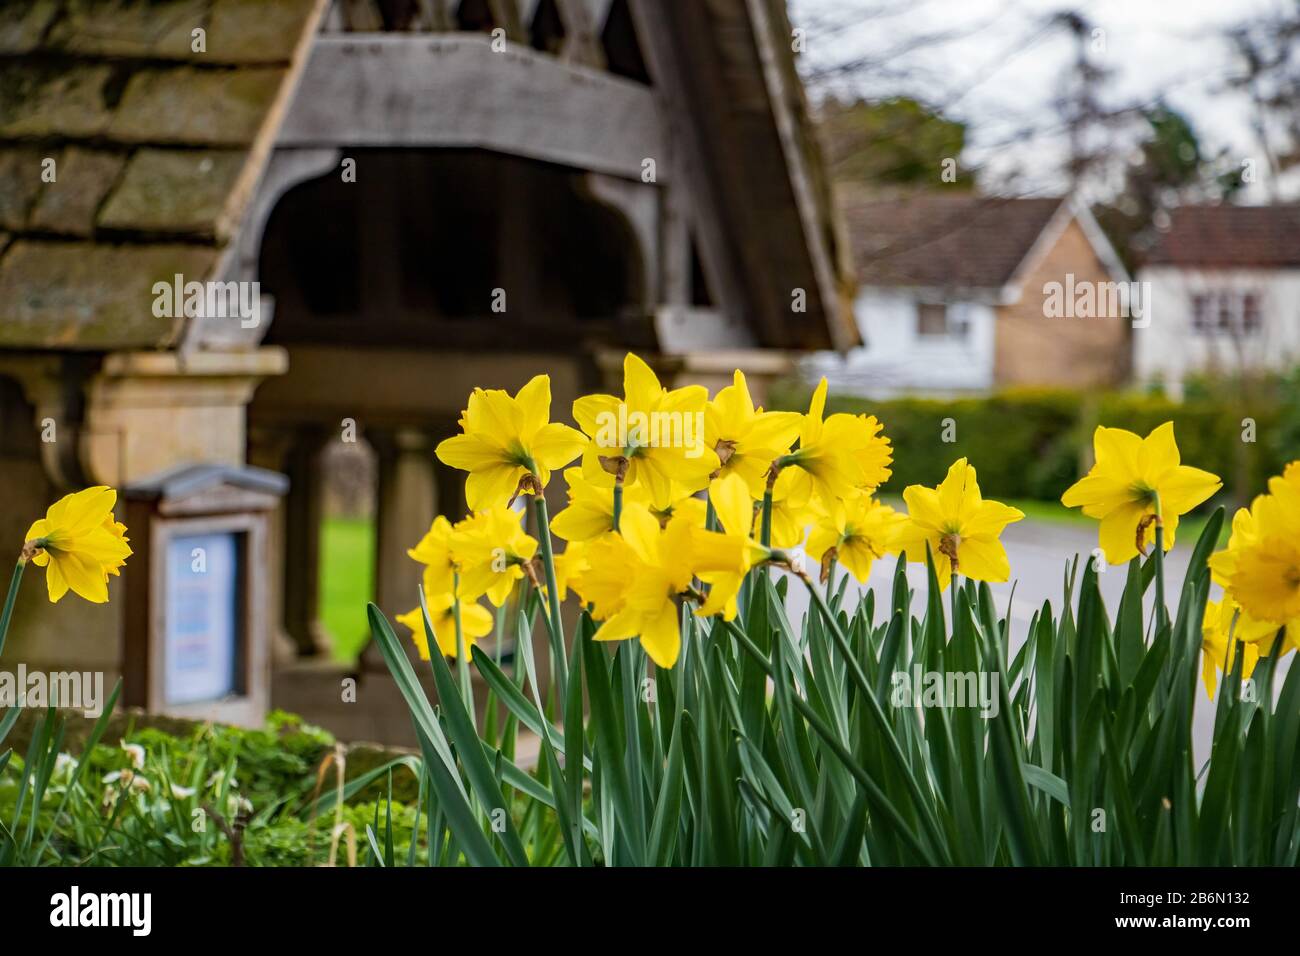 Daffodils blooming near the lychgate in St Peter's churchyard, Sharnbrook, Bedfordshire, UK Stock Photo